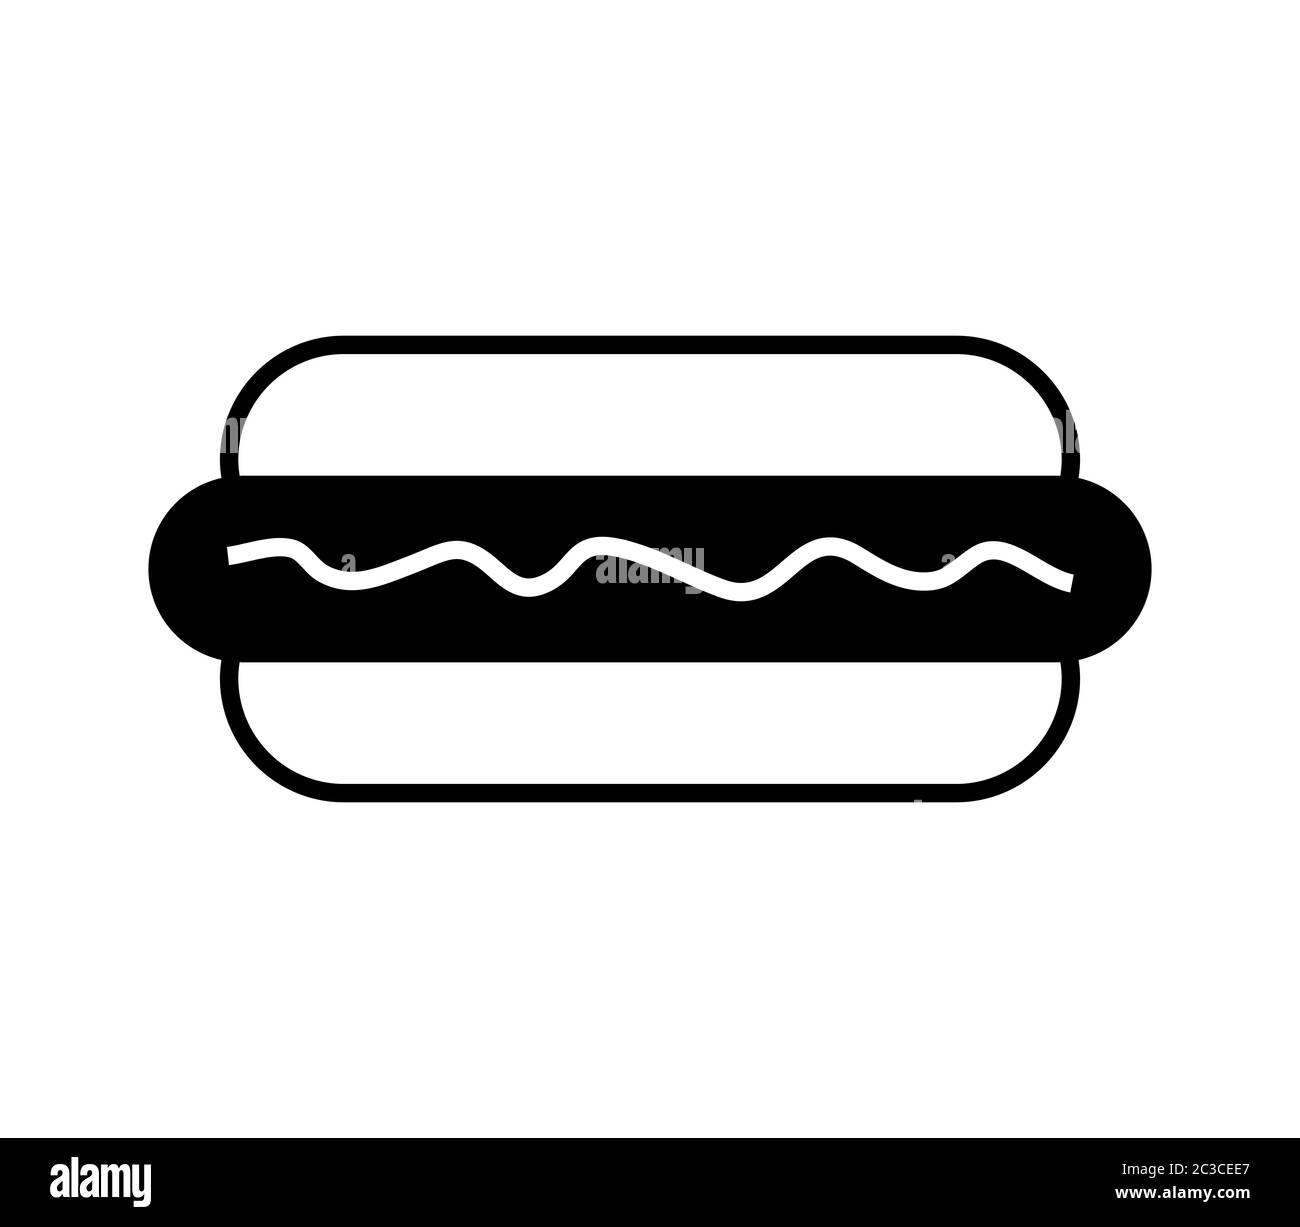 hot dog icon illustrated in vector on white background Stock Photo